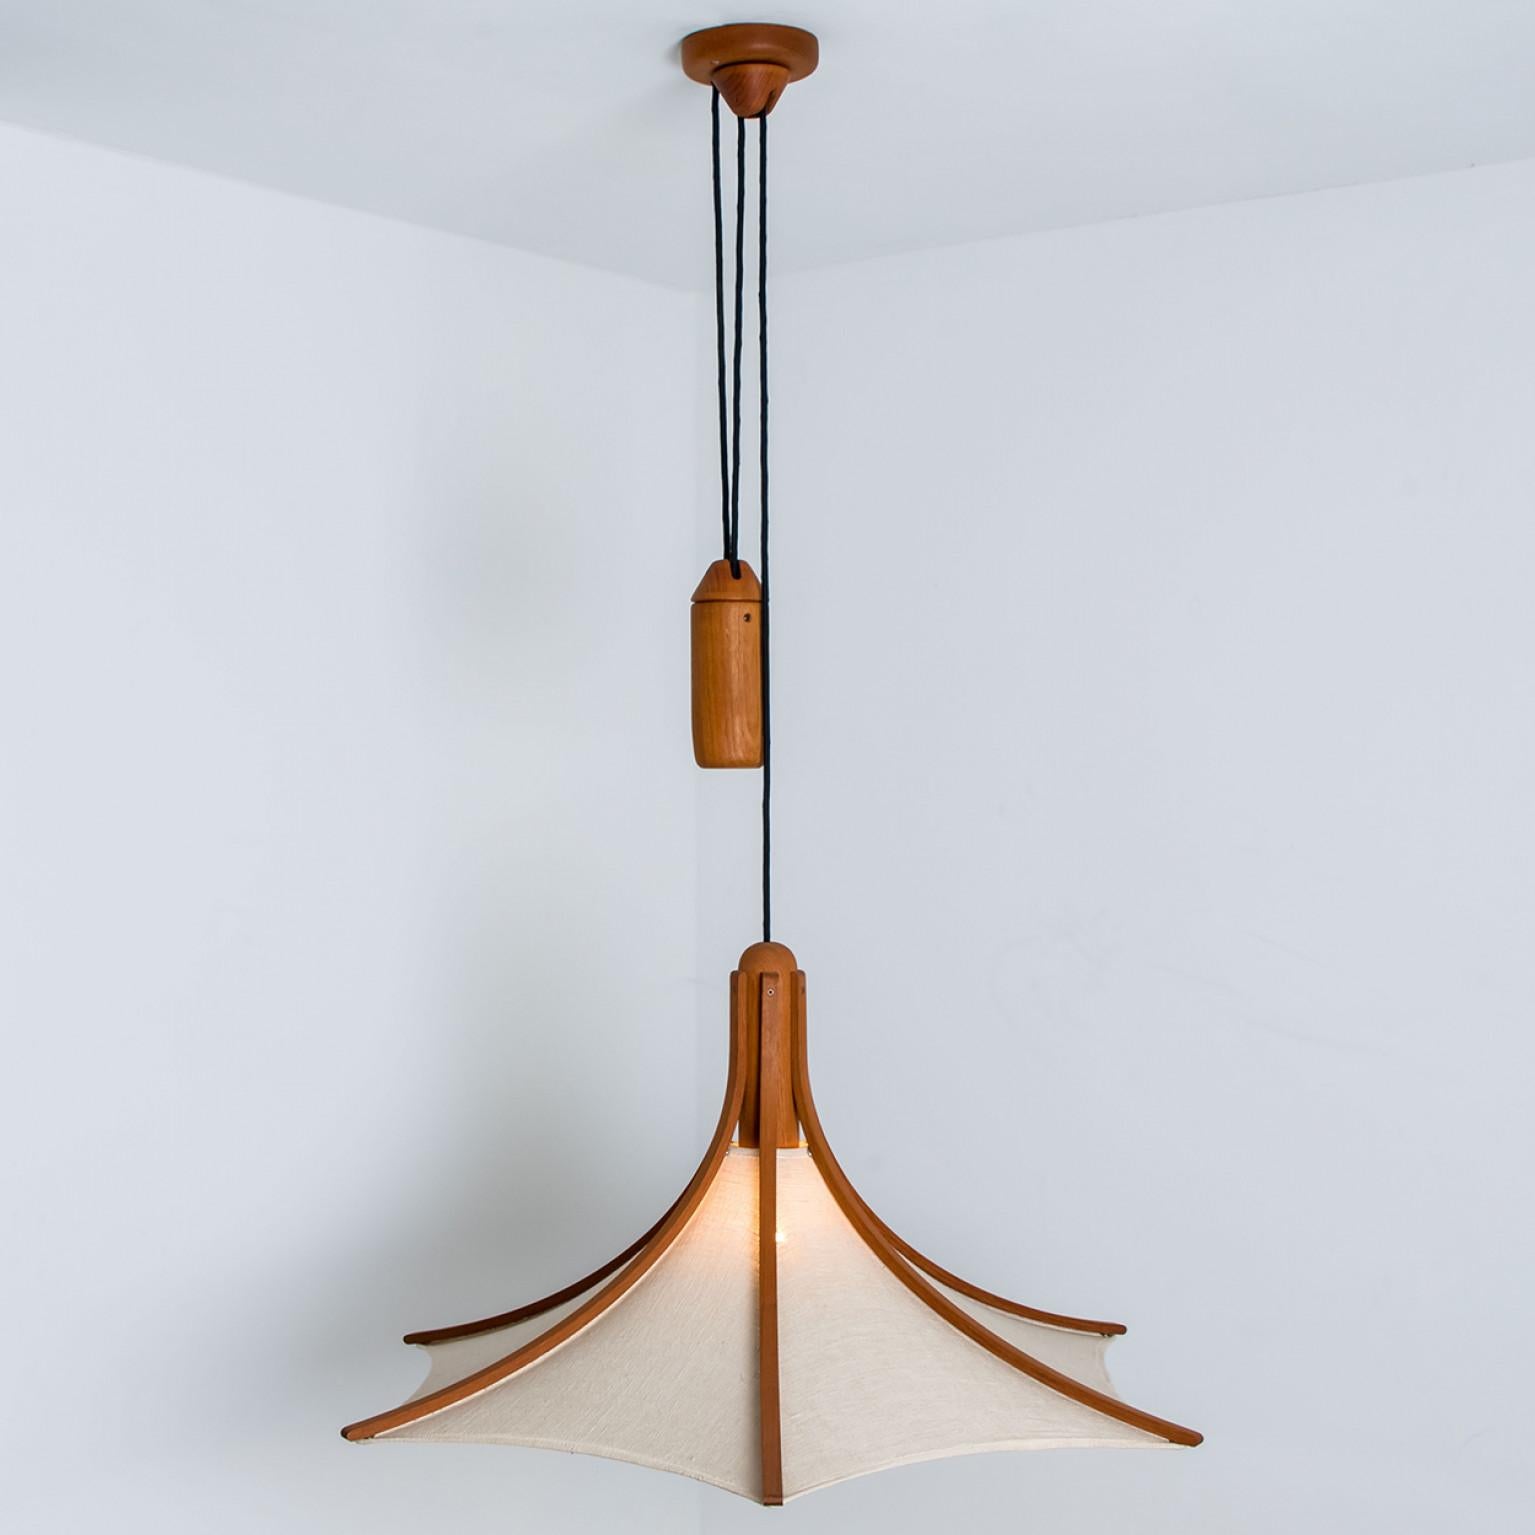 1 of the 2 Wooden Pendant Light with Textile Shade by Domus Germany, 1970s For Sale 7